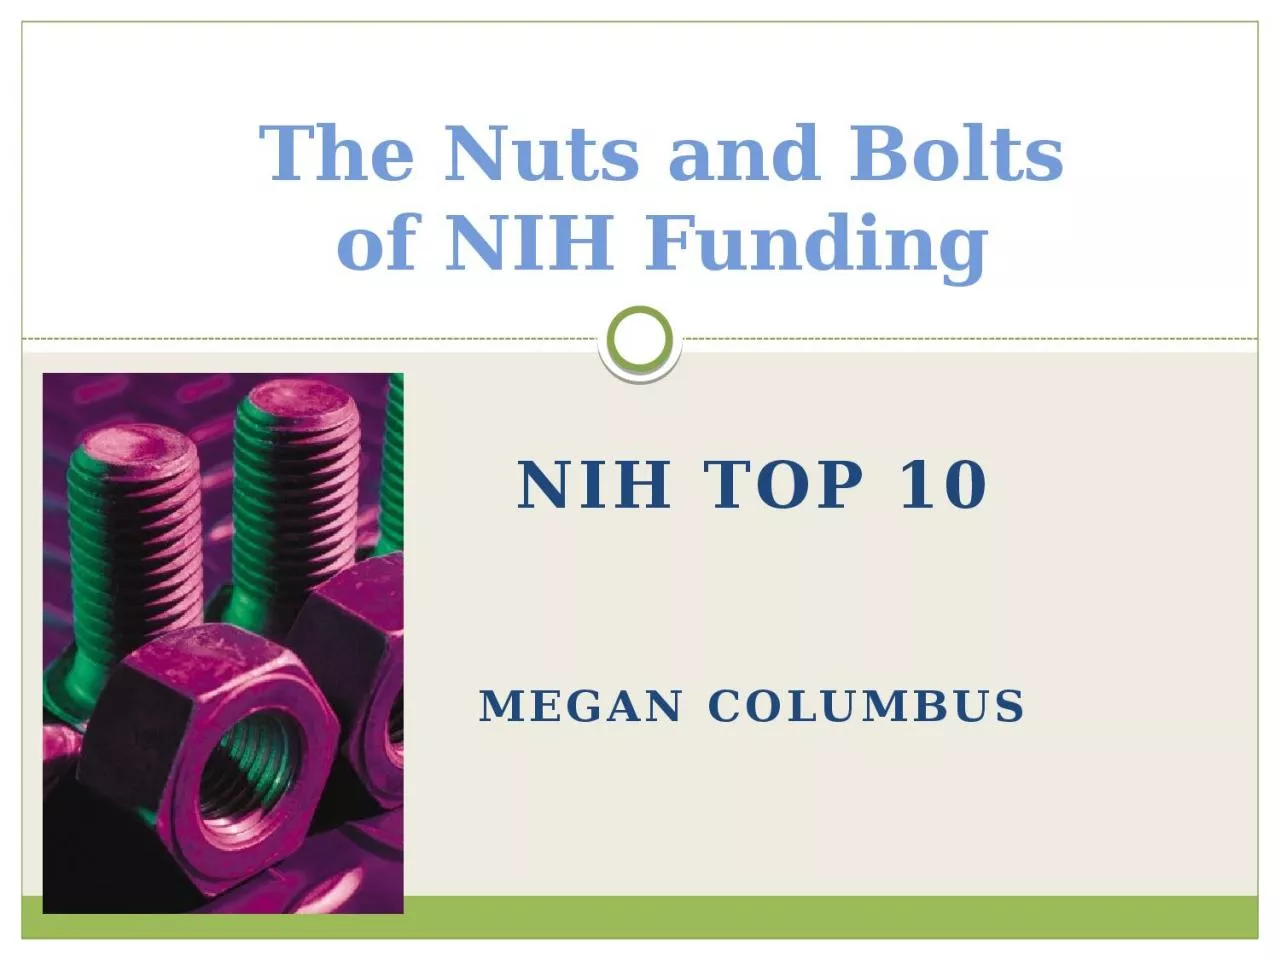 The Nuts and Bolts of NIH Funding